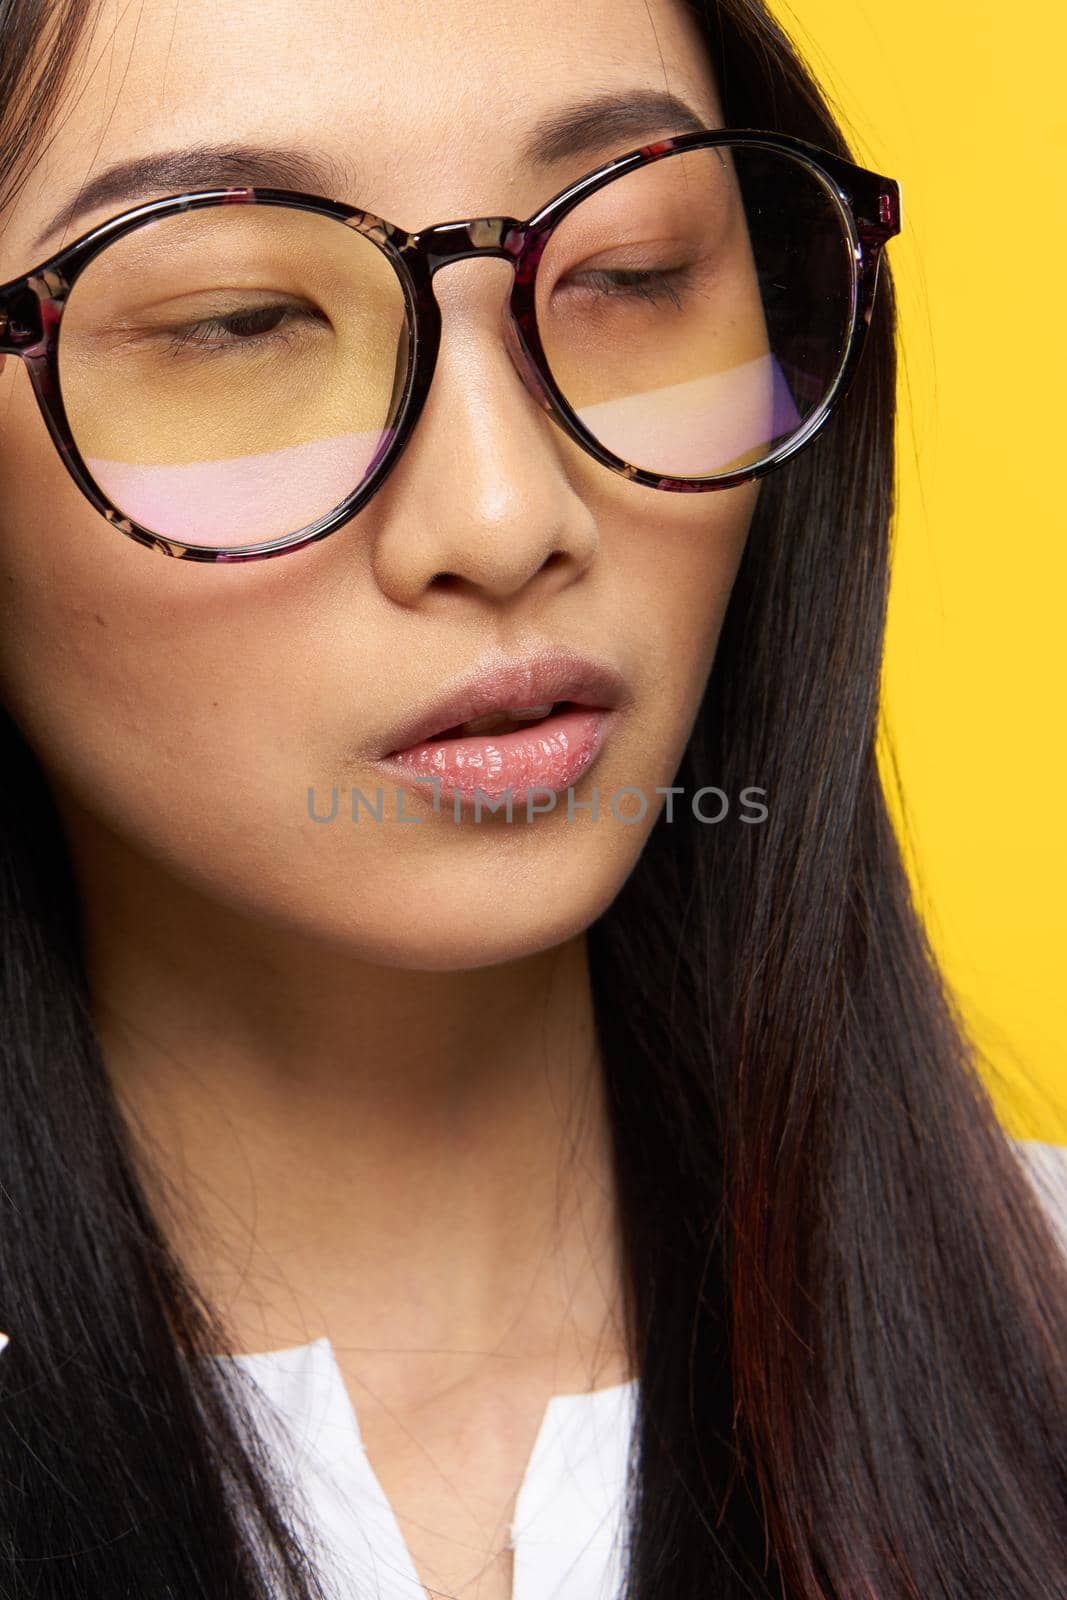 elegant woman of asian appearance with glasses close-up attractive look by SHOTPRIME